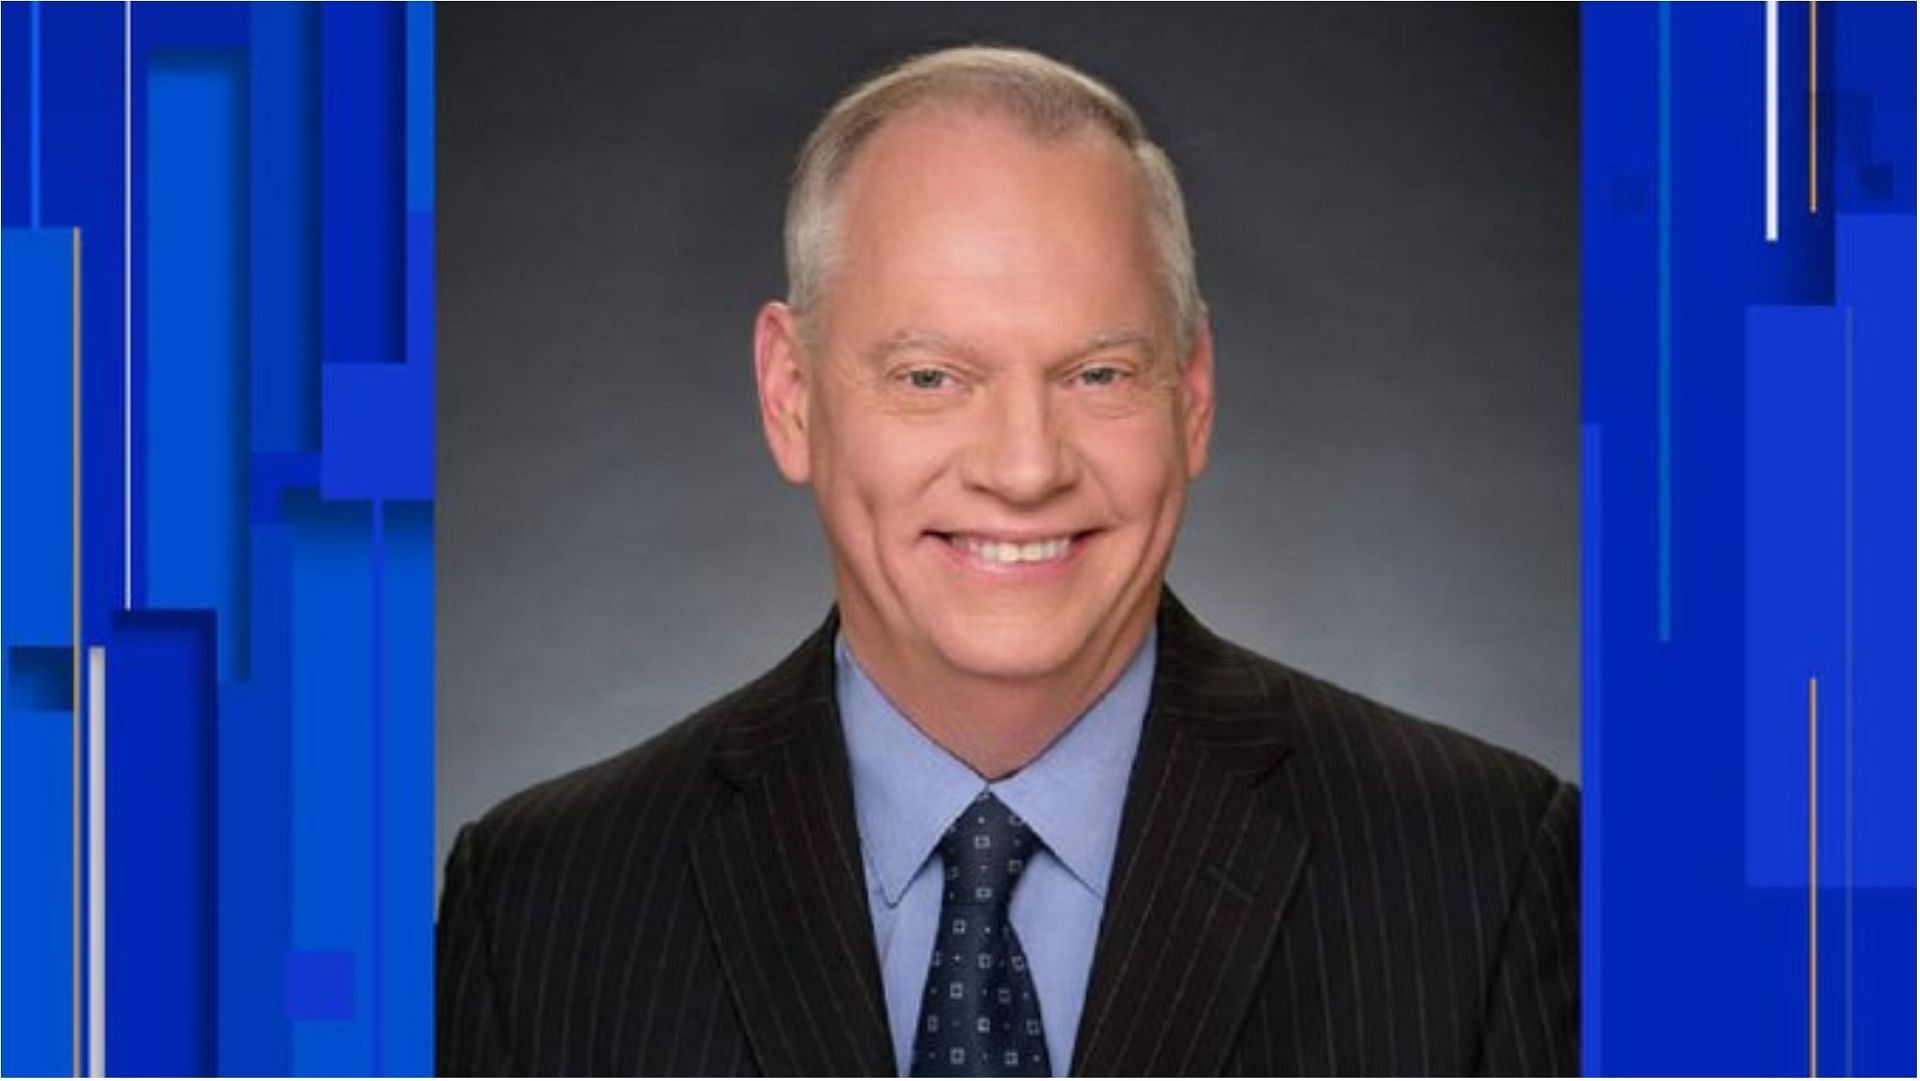 Greg Simmons has announced his exit from KSAT-TV after being arrested (Image via TolerateNoEvil/Twitter)